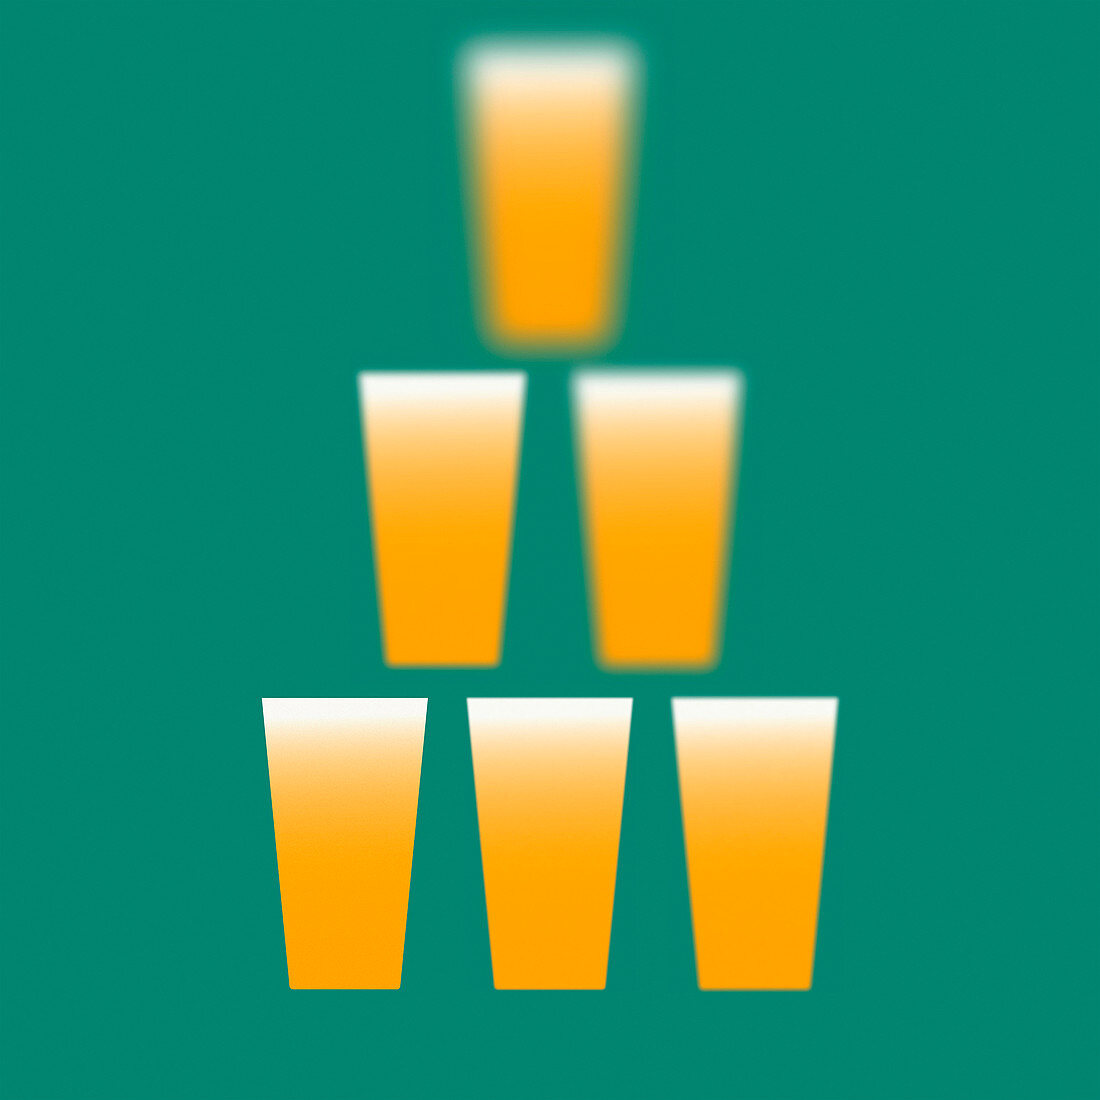 Beer glasses in pyramid getting blurrier, illustration